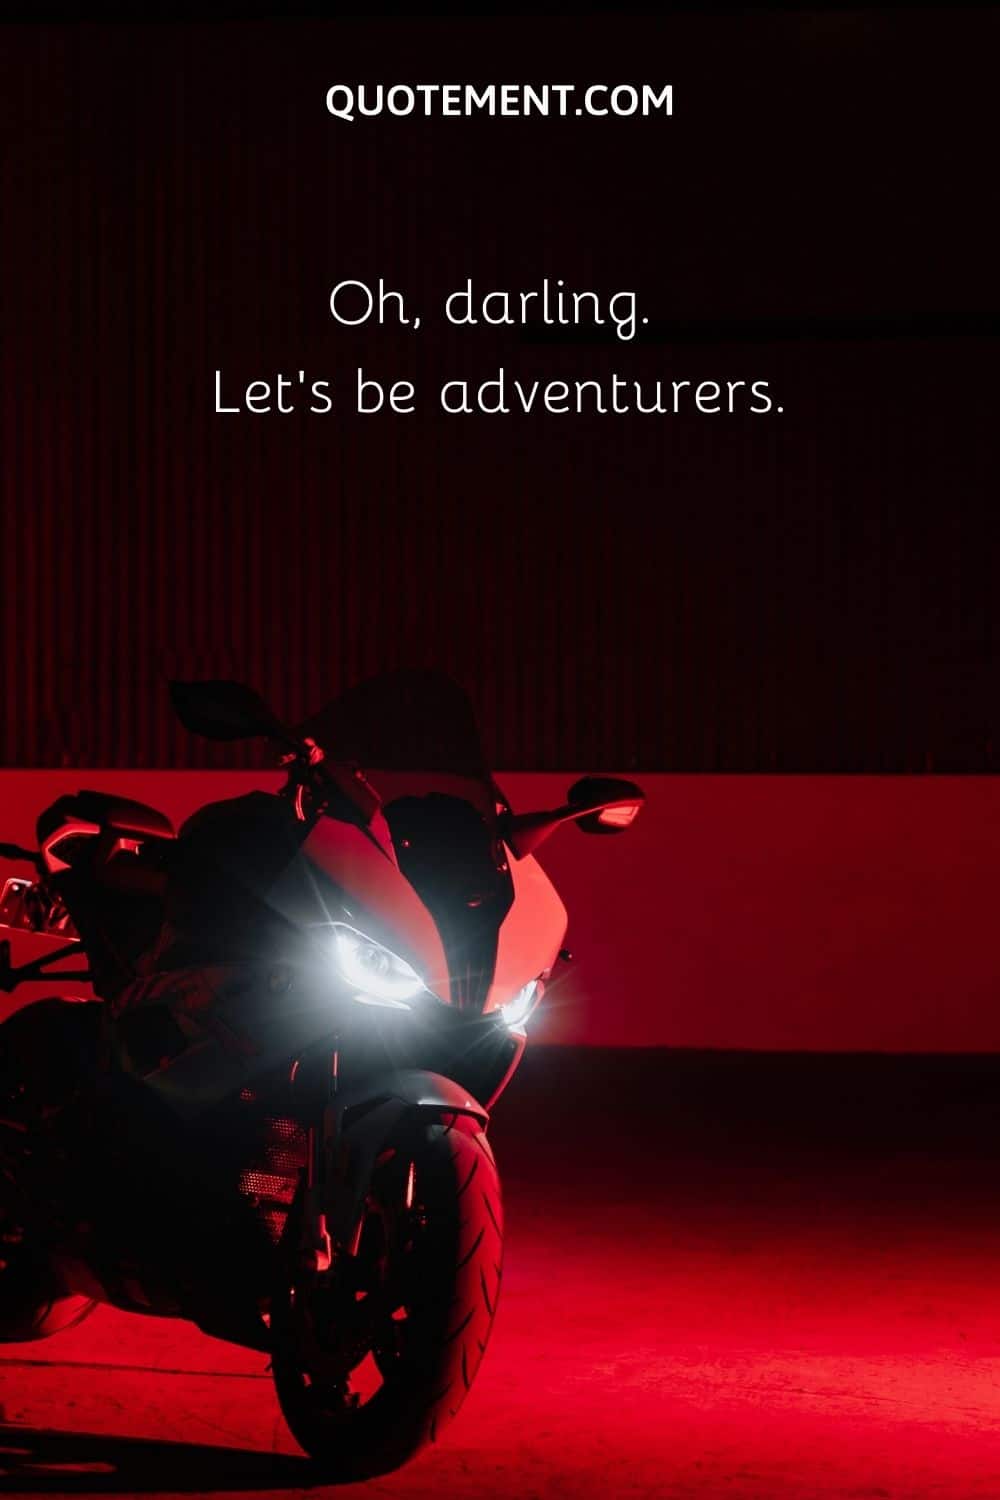 Oh, darling. Let’s be adventurers.